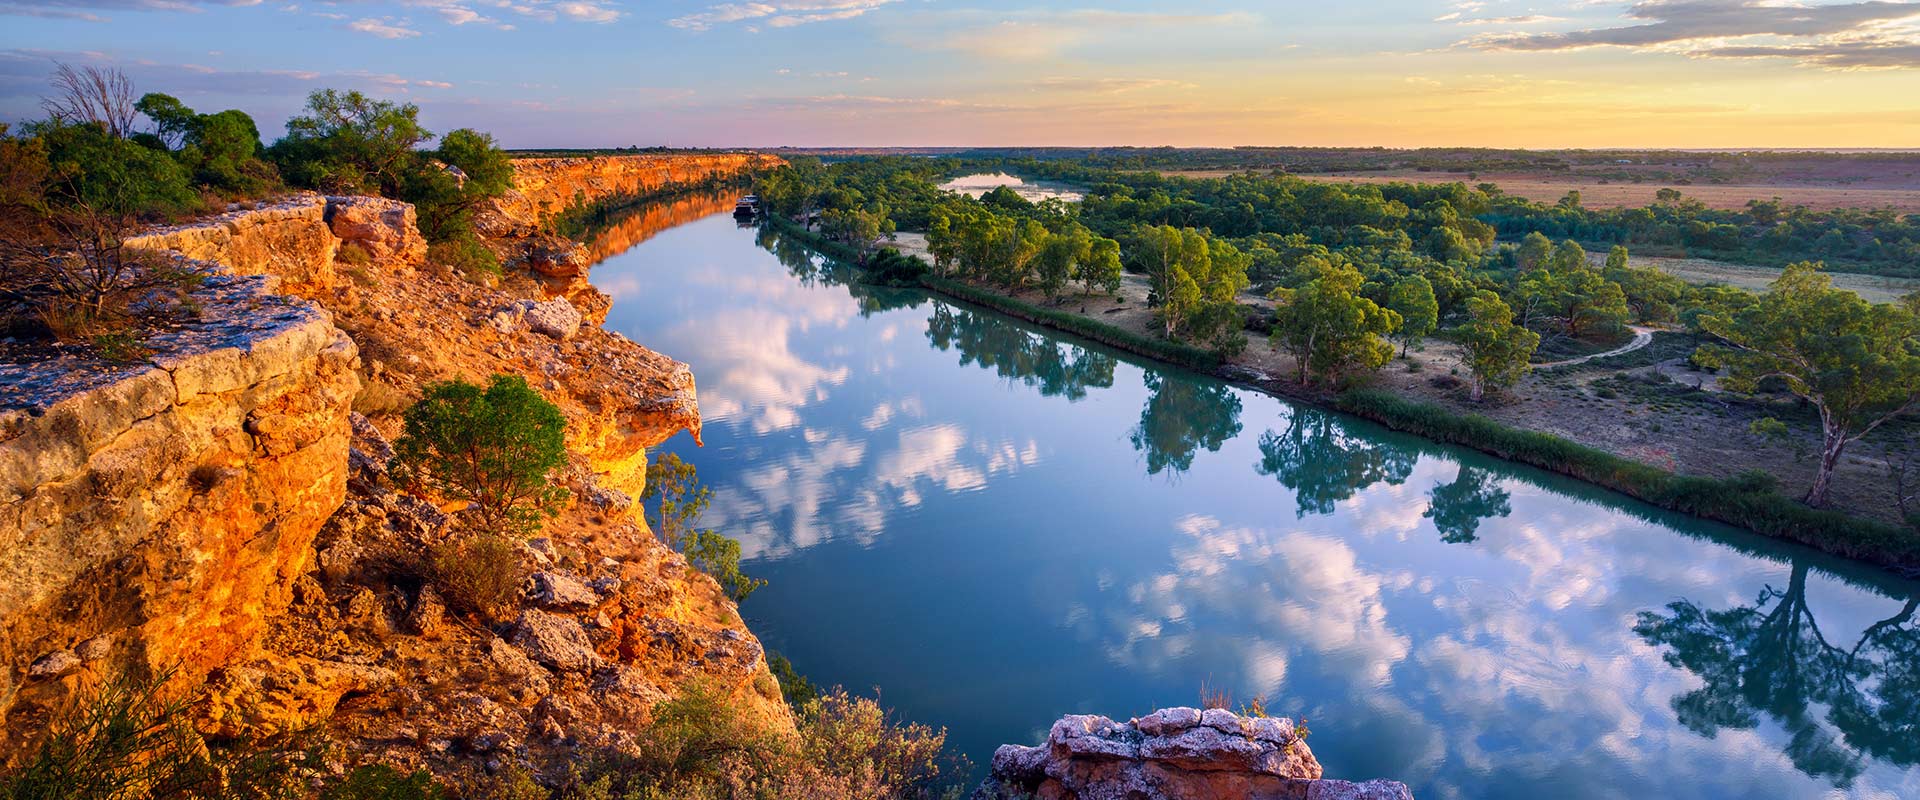 16-surprising-facts-about-murray-river